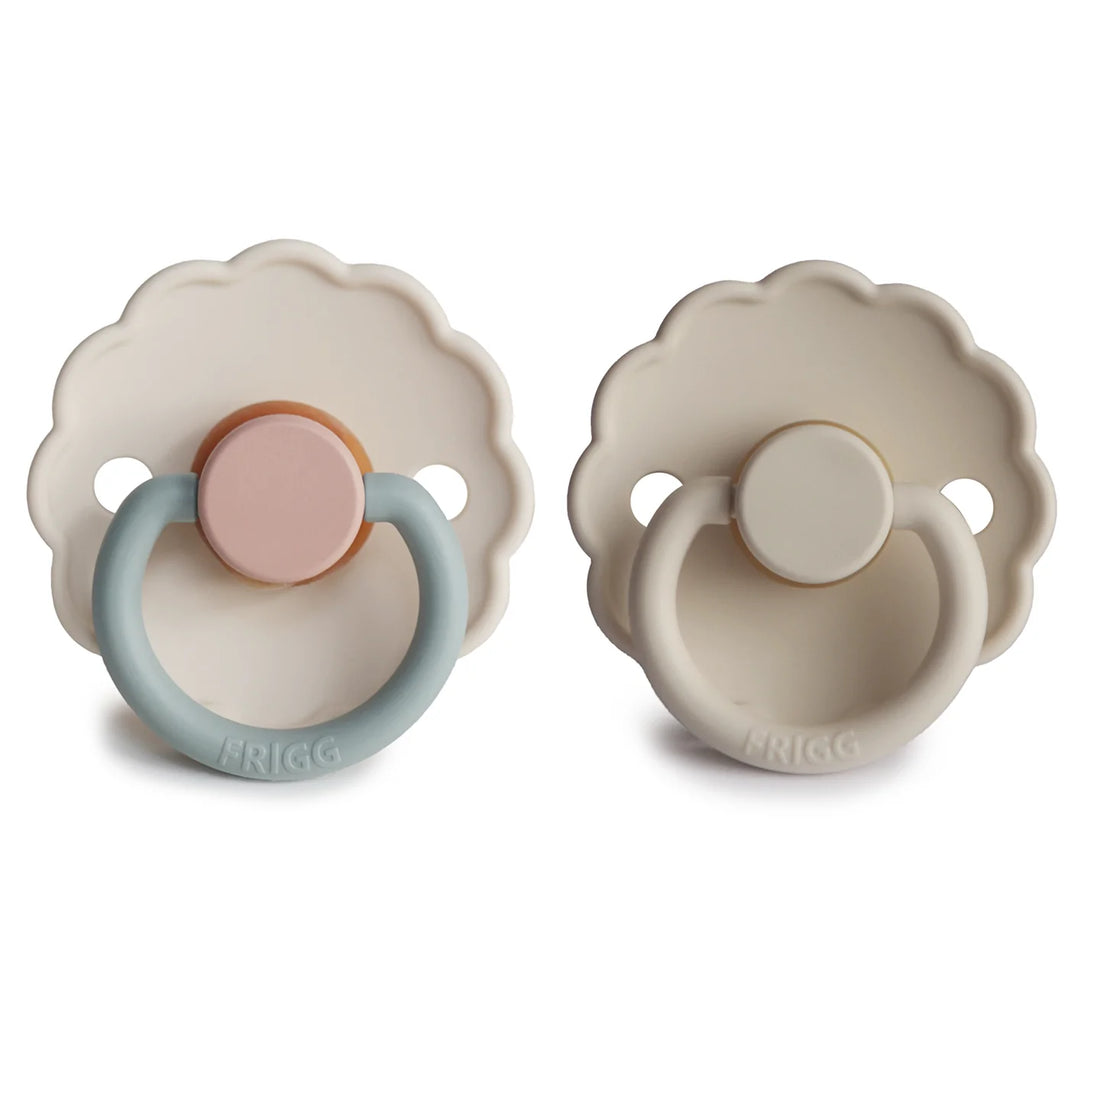 FRIGG DAISY NATURAL RUBBER PACIFIER | COTTON CANDY/SANDSTONE | 2 PACK